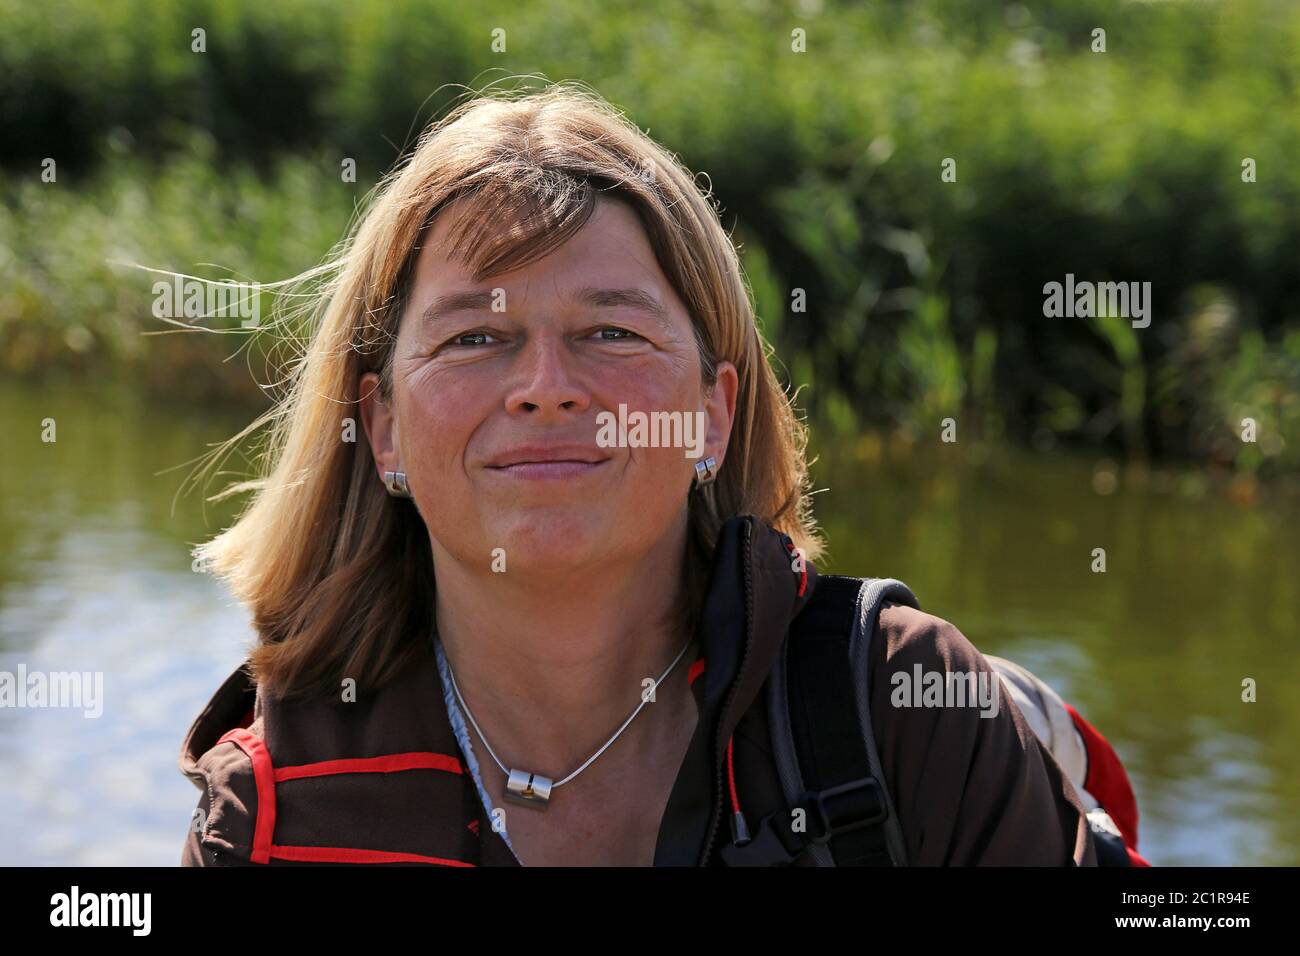 Woman around Fifty during Outdoor Activity on The Baltic Sea Stock Photo